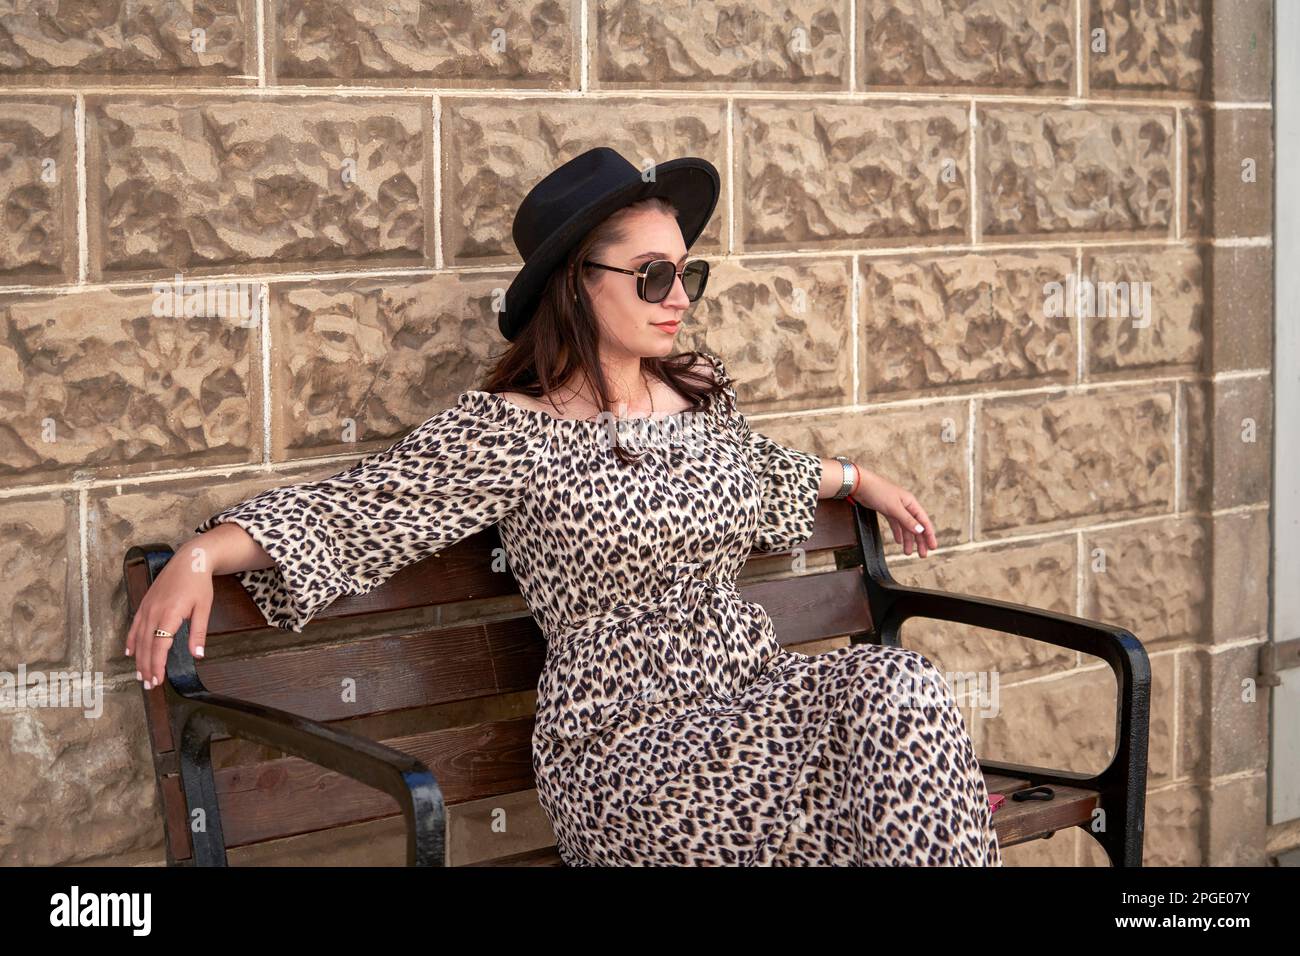 Young girl in leopard dress, black hat and sunglasses posing in the park Stock Photo